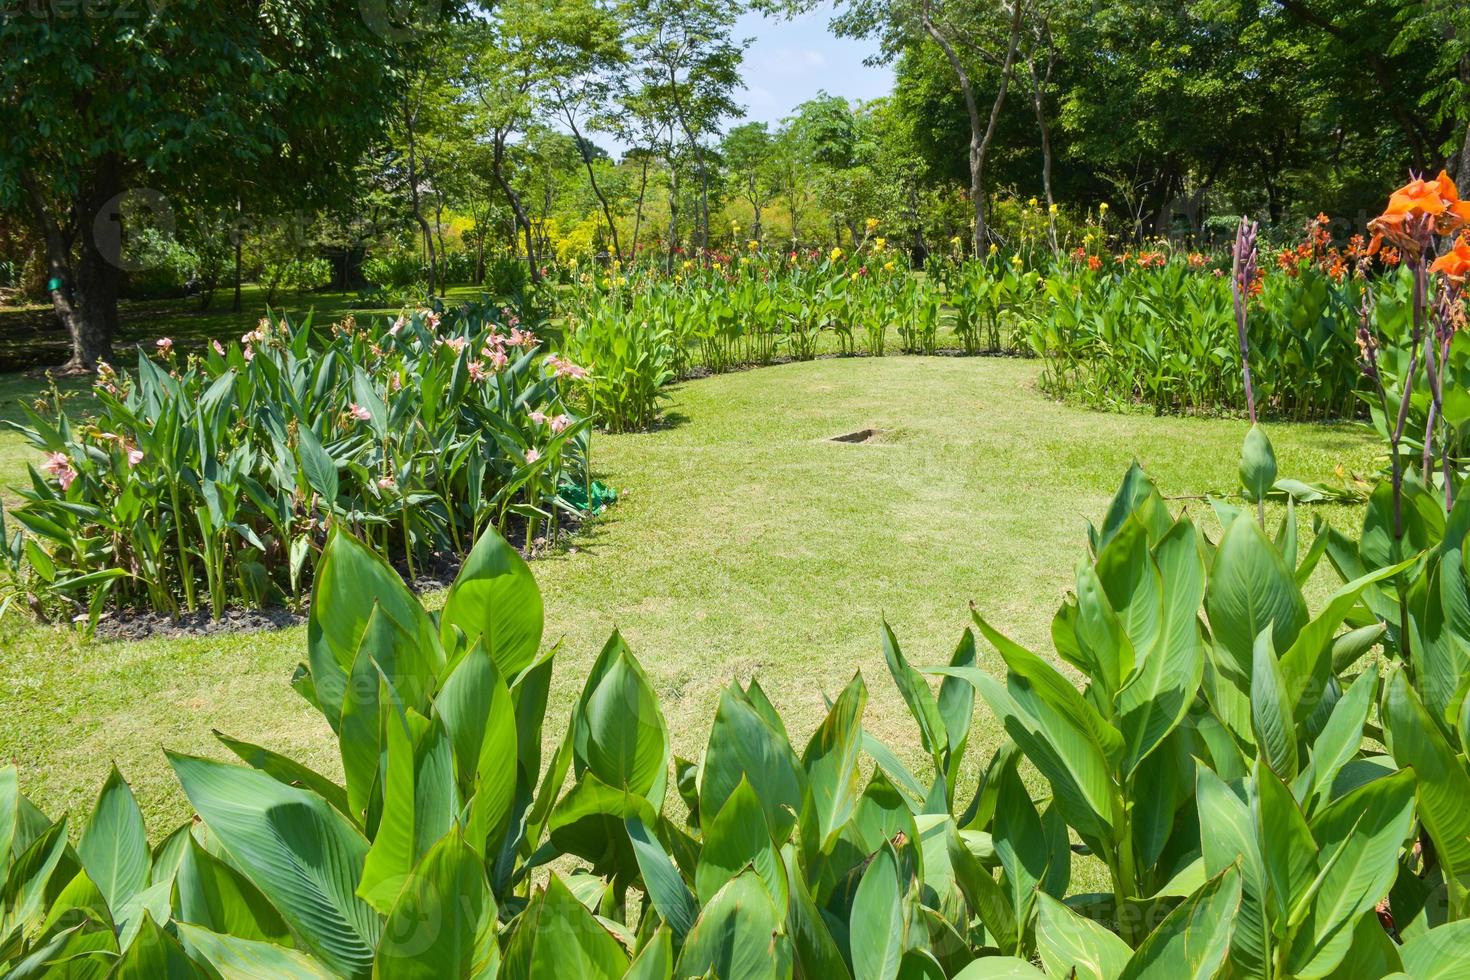 Canna flower field with beautiful colors blooming in the garden photo